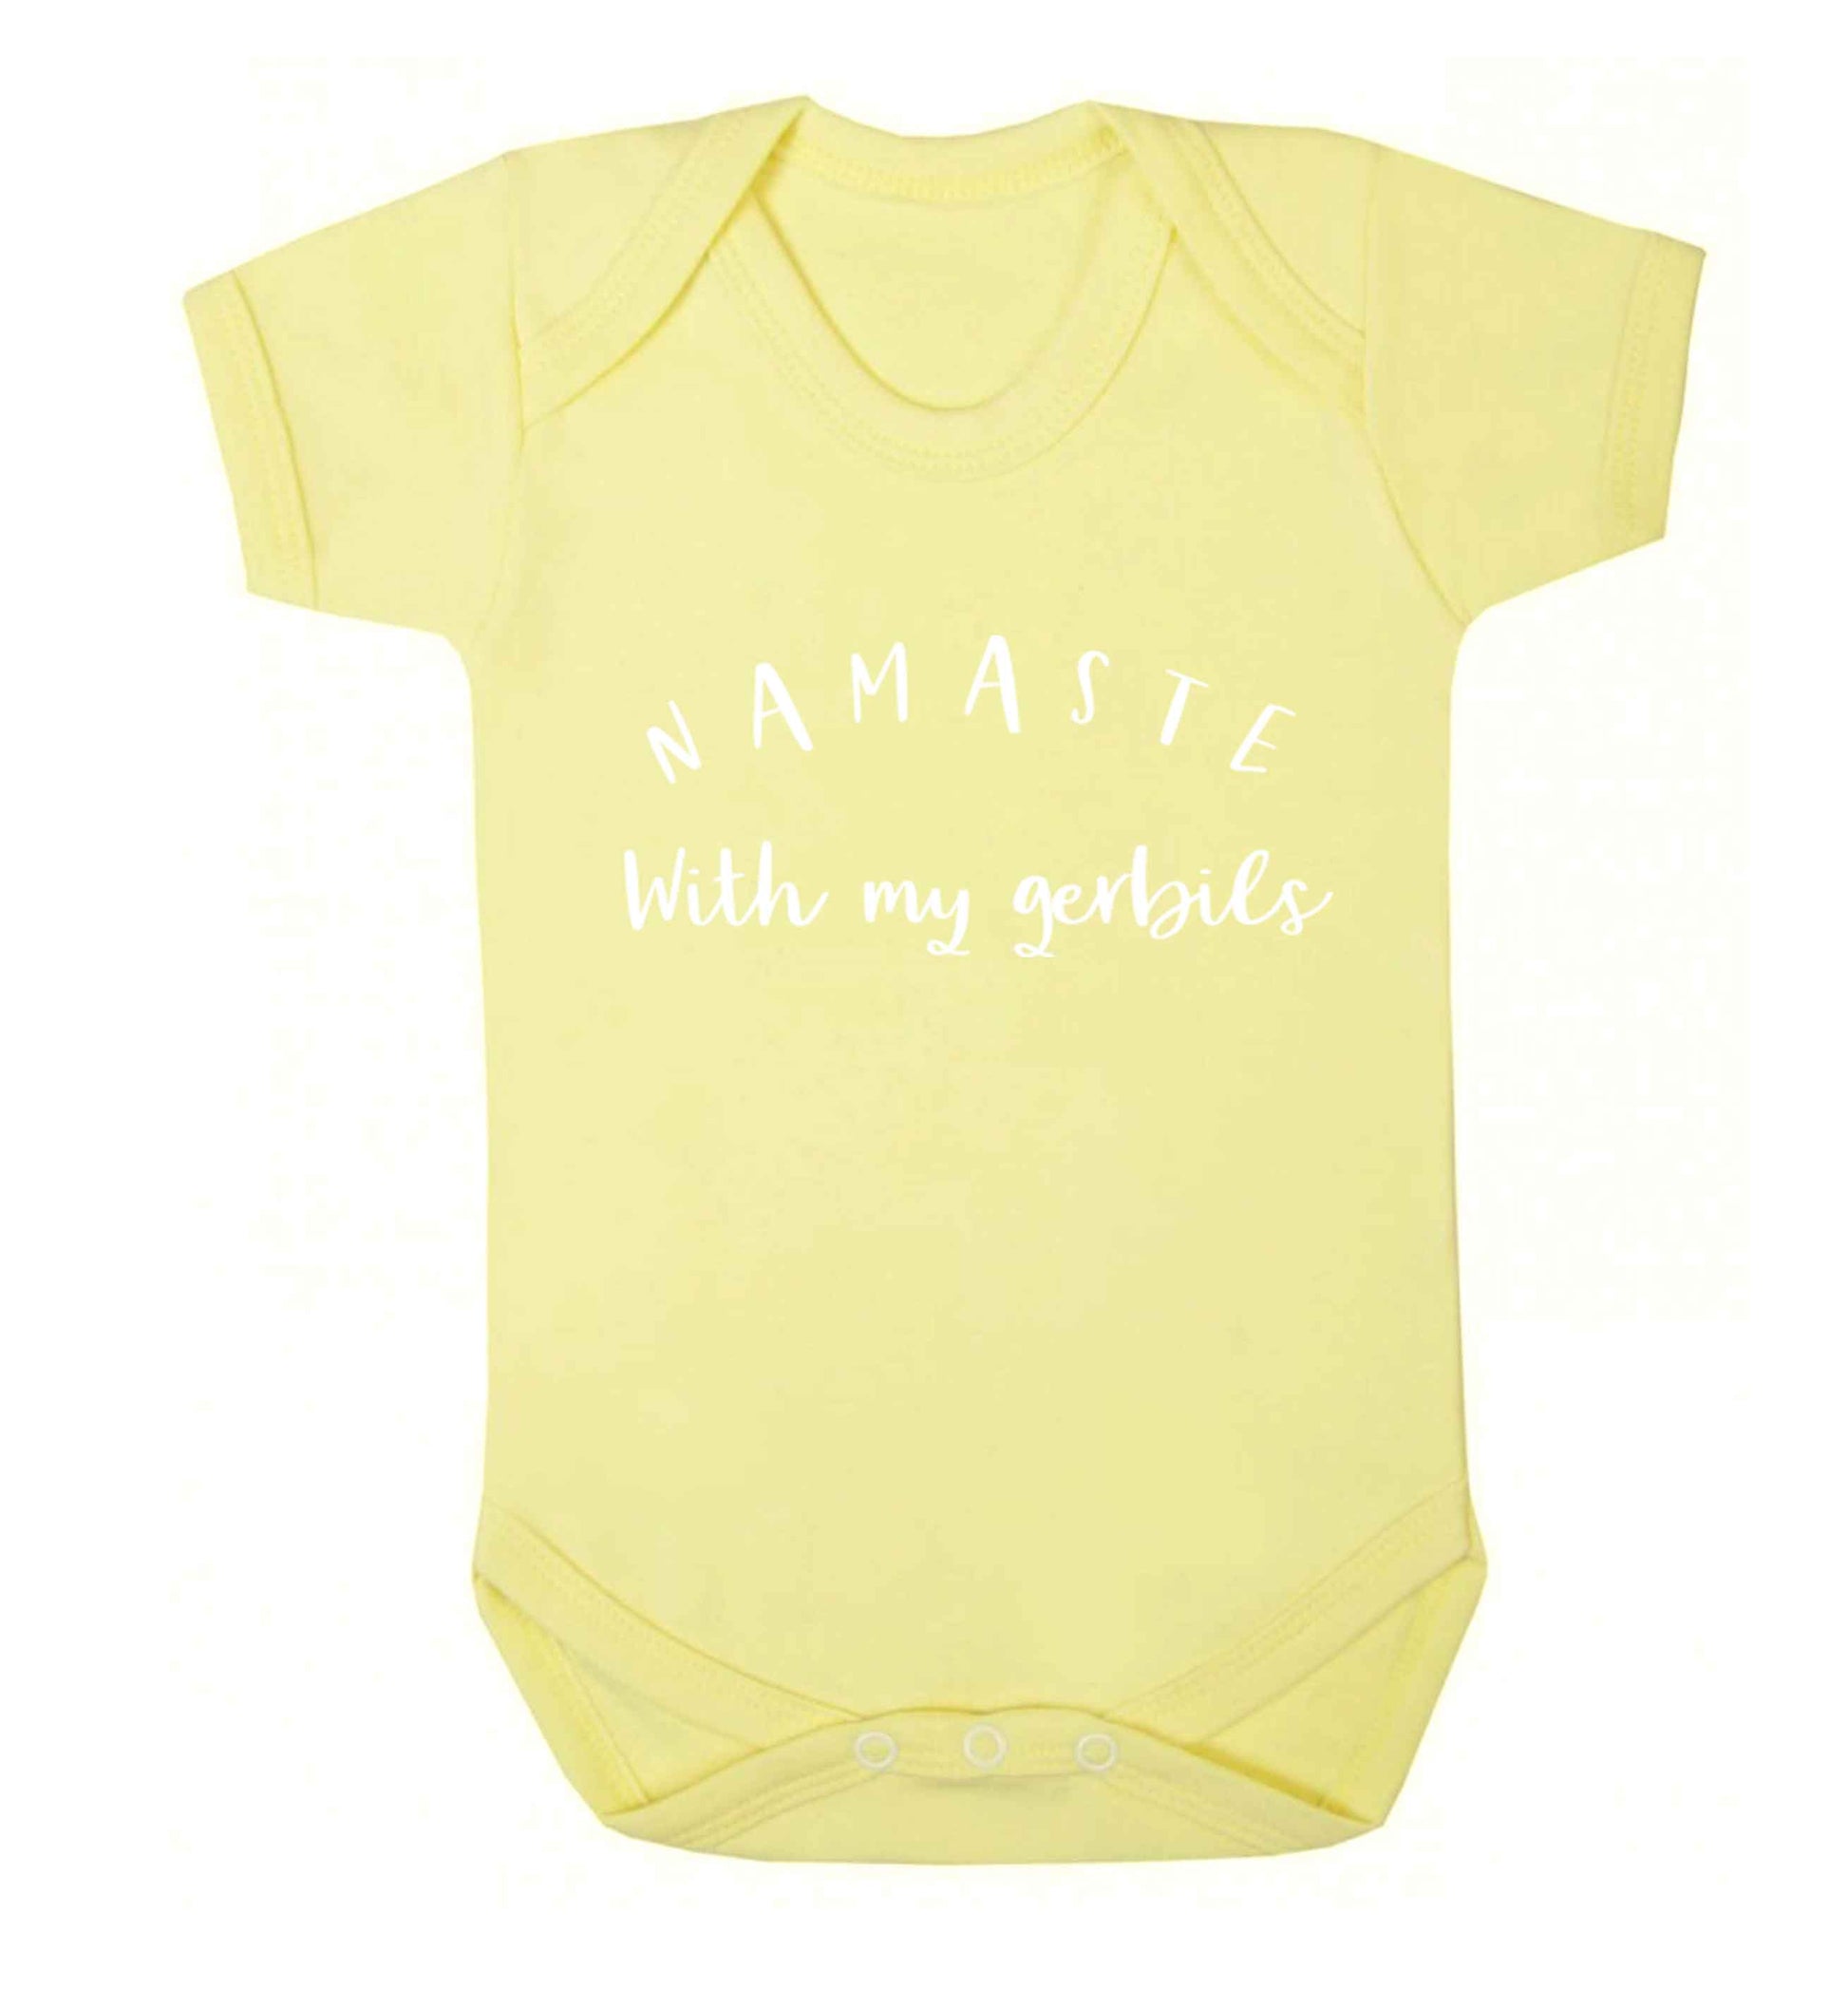 Namaste with my gerbils Baby Vest pale yellow 18-24 months